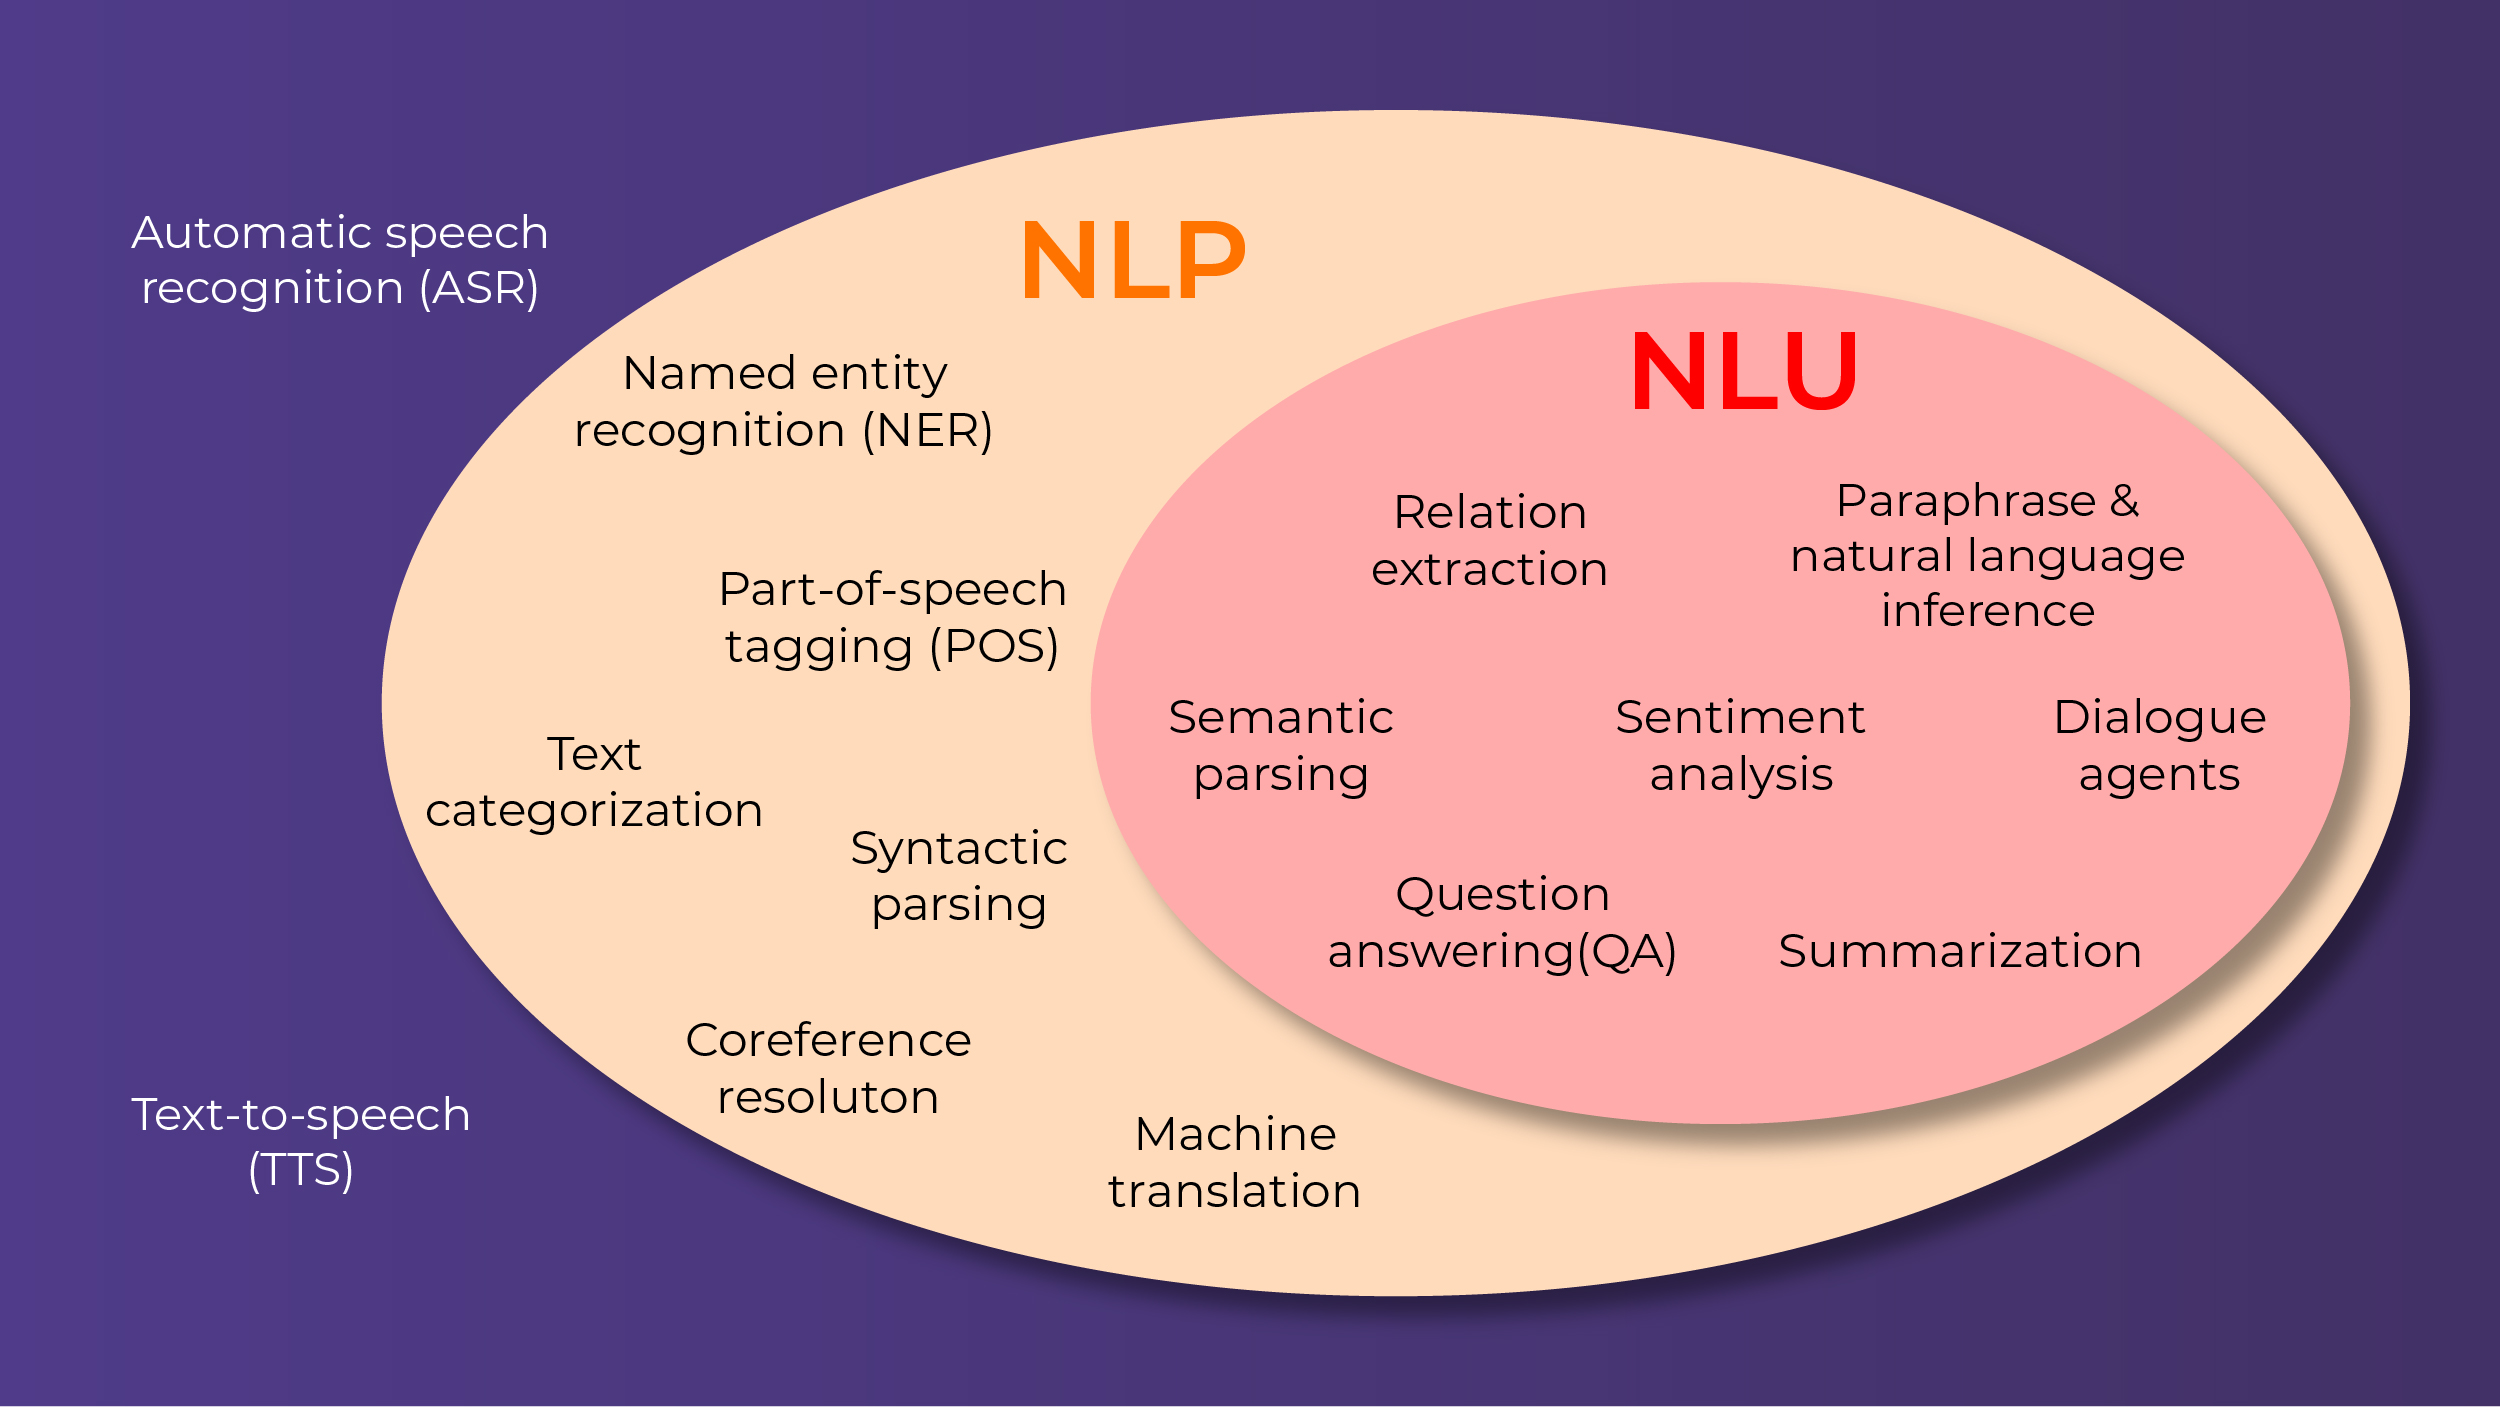 Difference between NLP and NLU